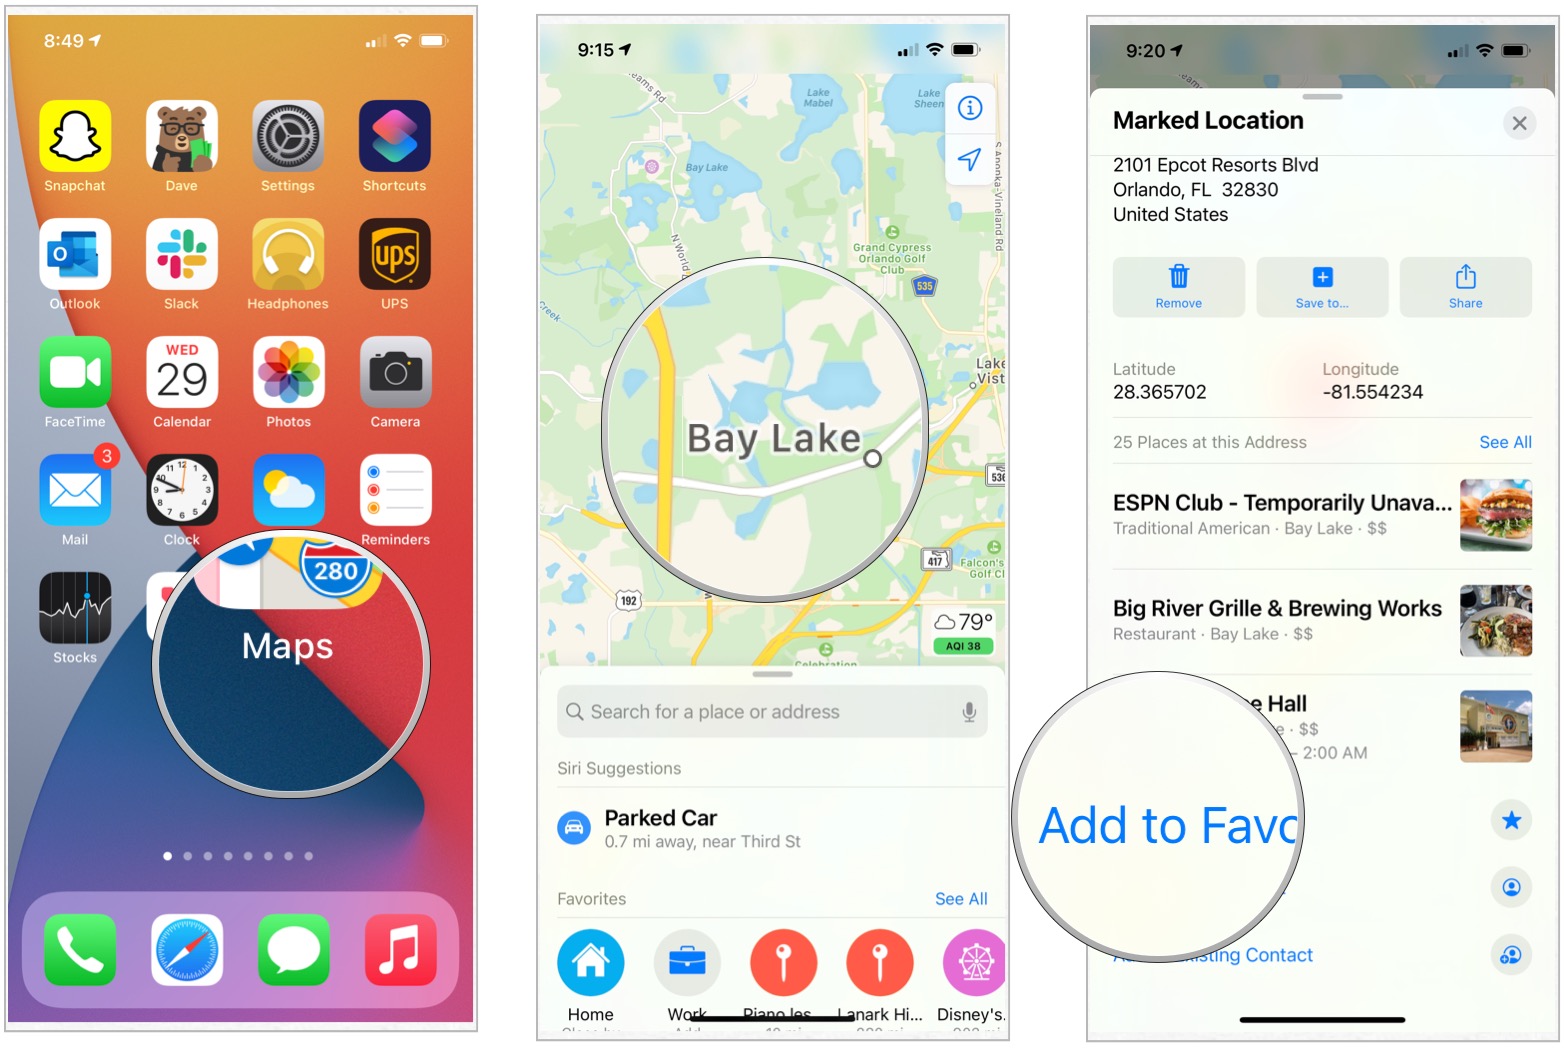 To add a location to your favorites, launch the maps app then find the location. Swipe up, then tap on Add Favorite.